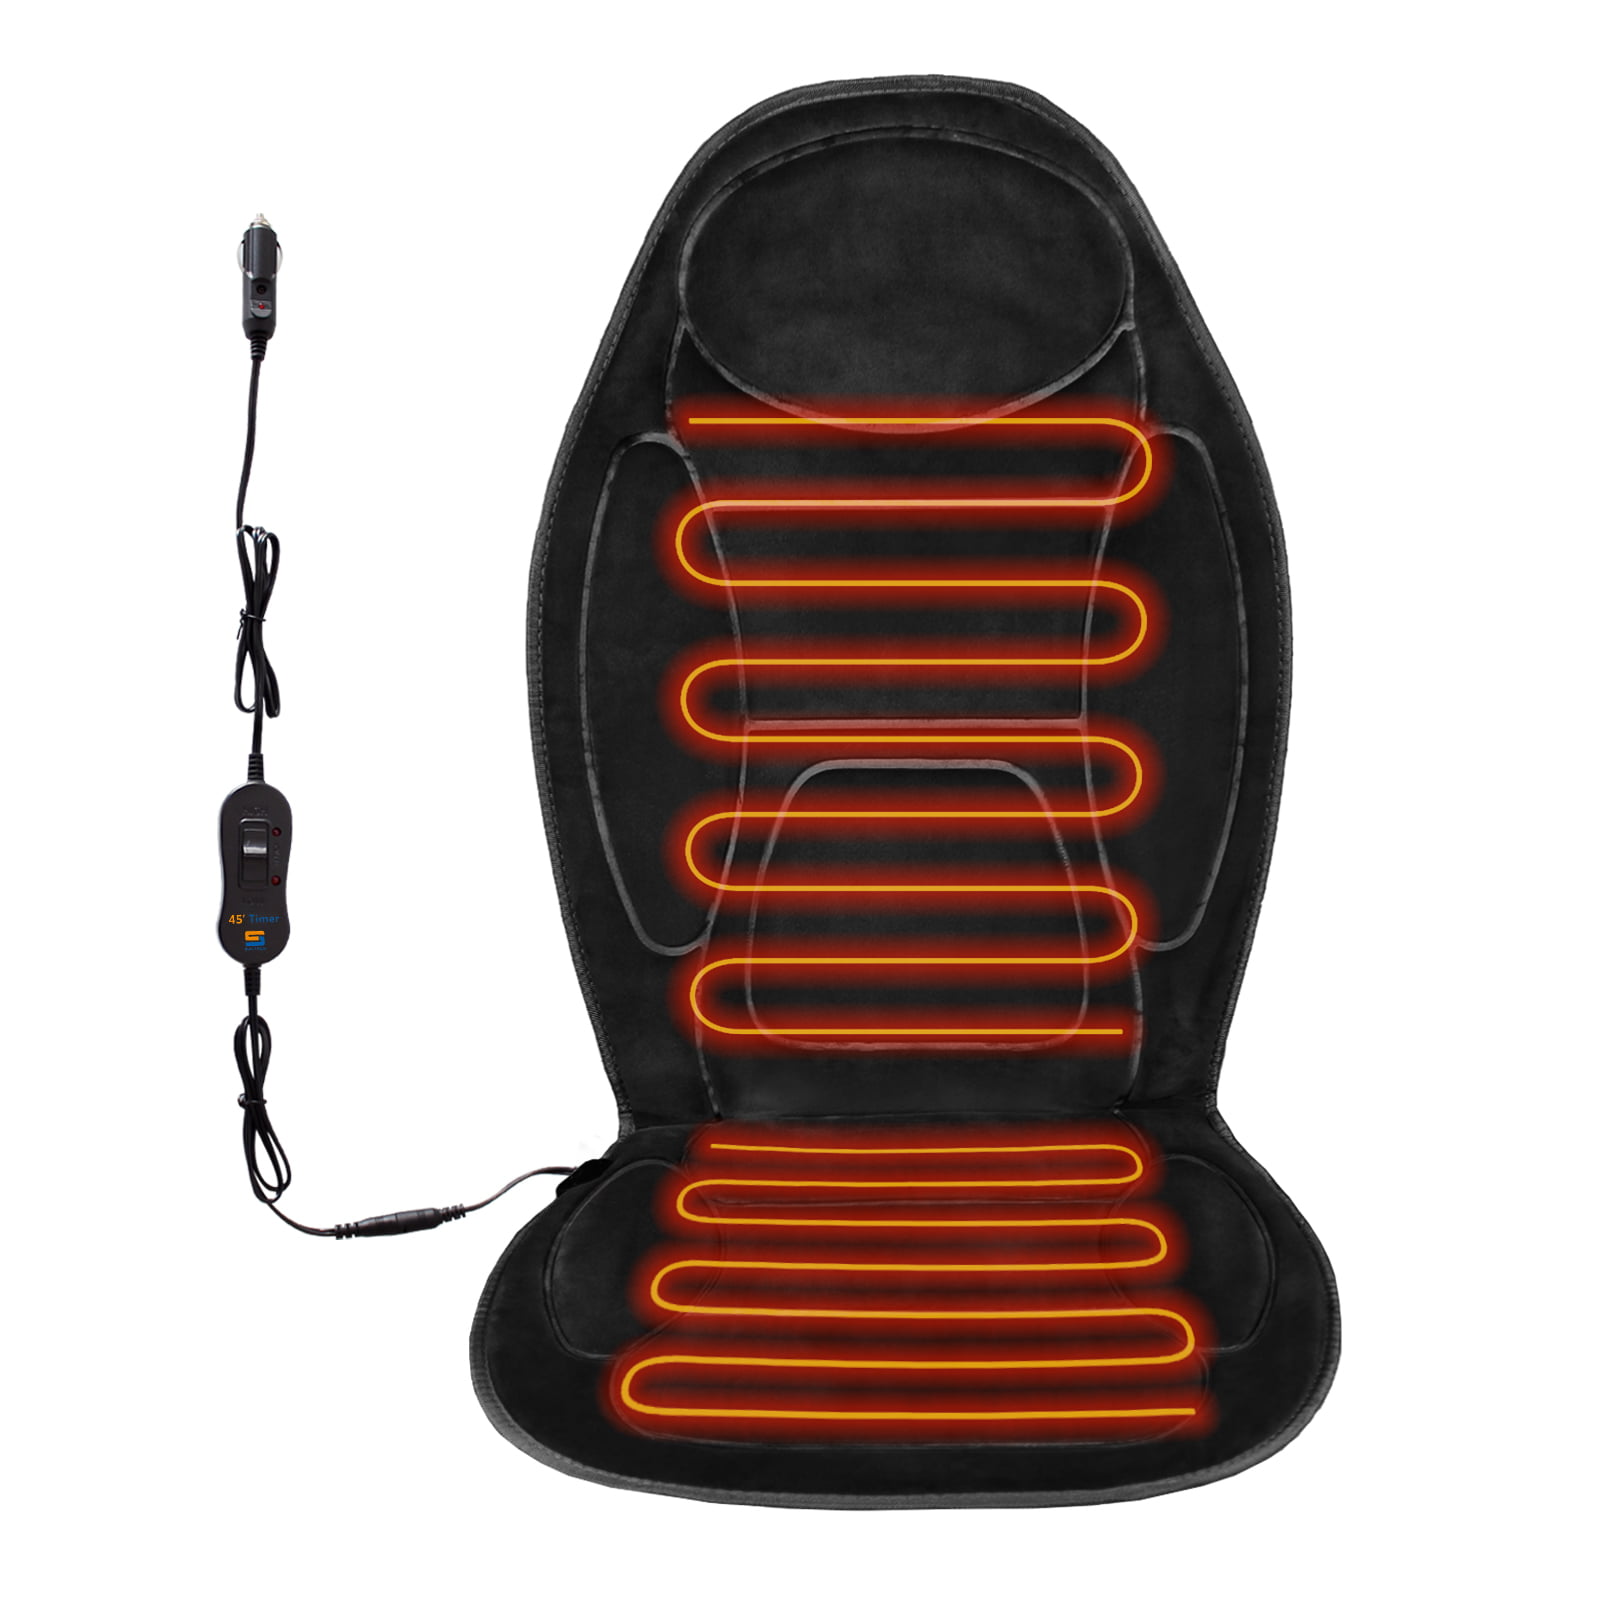 Heated Seat Cushion, 12V/24V Universal Car Heated Seat Cushion, Soft Warm  Seat Covers for Full Back and Seat, Suitable for Car Truck in Winter 